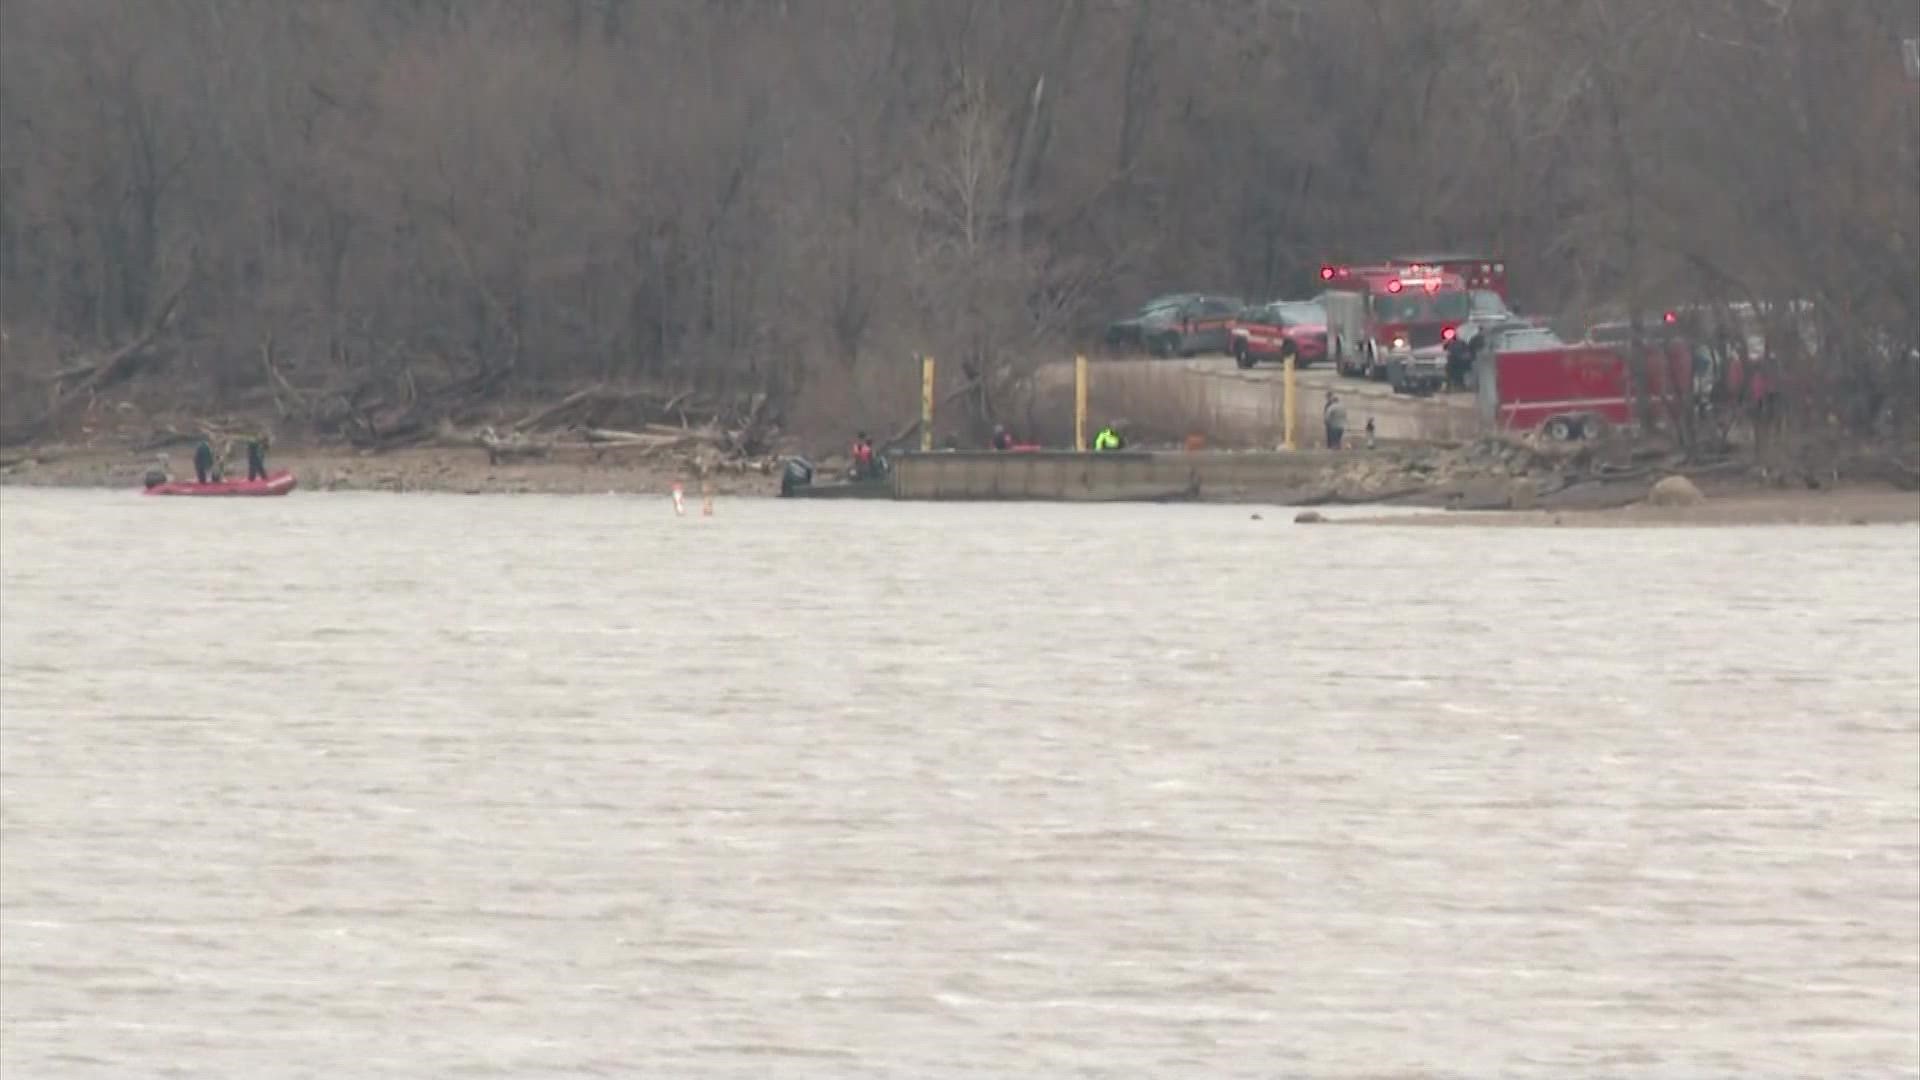 Dispatchers say a man called 911 after he and his brother were fishing and their boat sank.